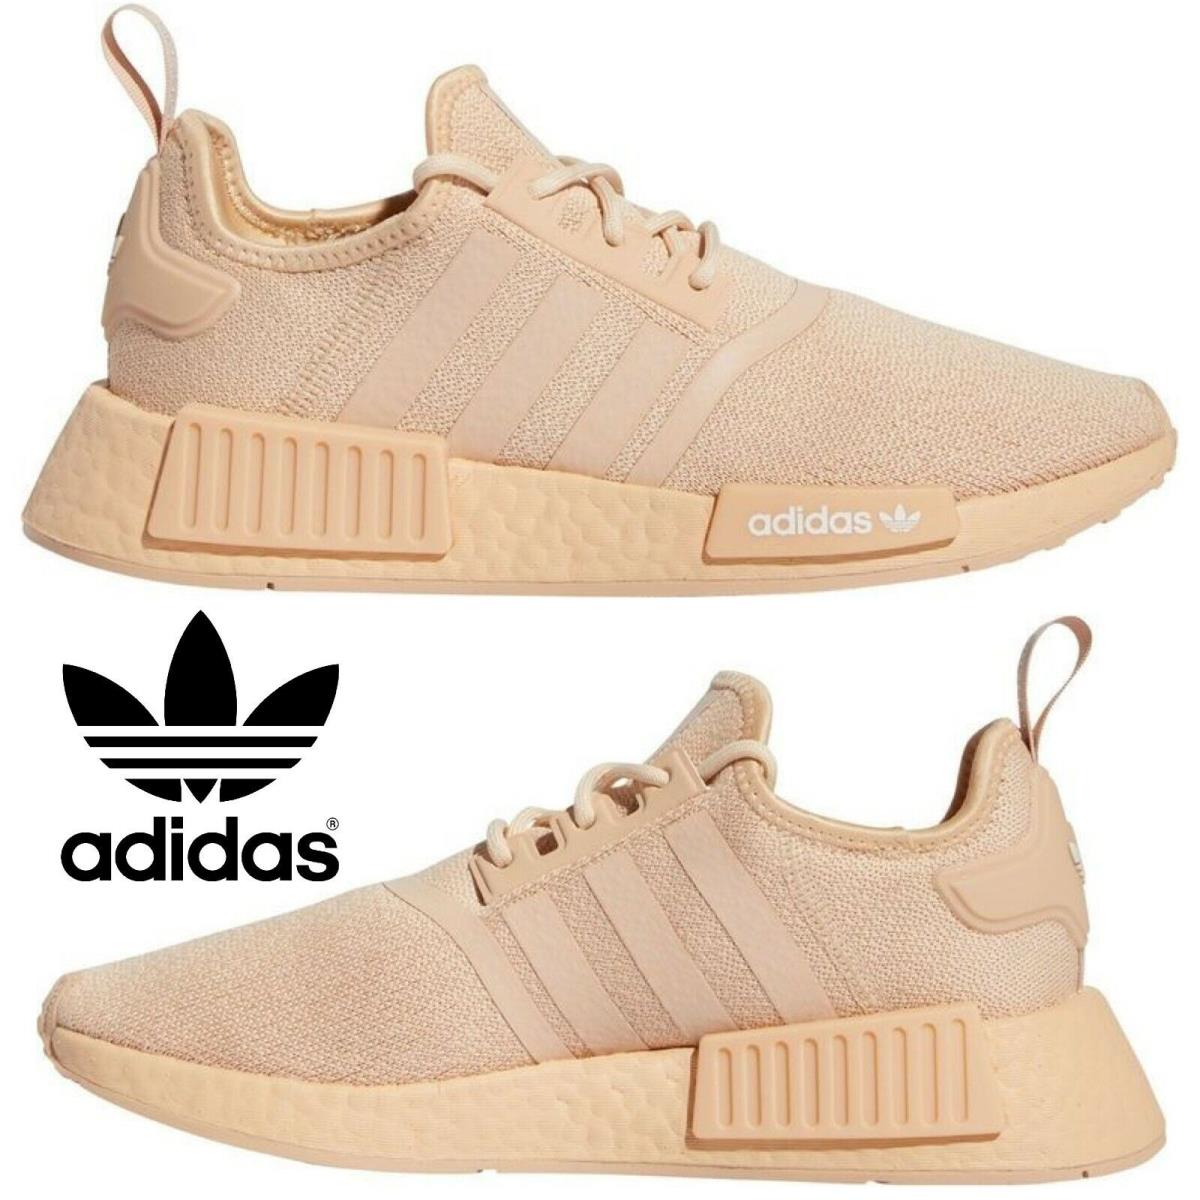 Adidas Originals Nmd R1 Women s Sneakers Casual Shoes Sport Running Ash Pearl